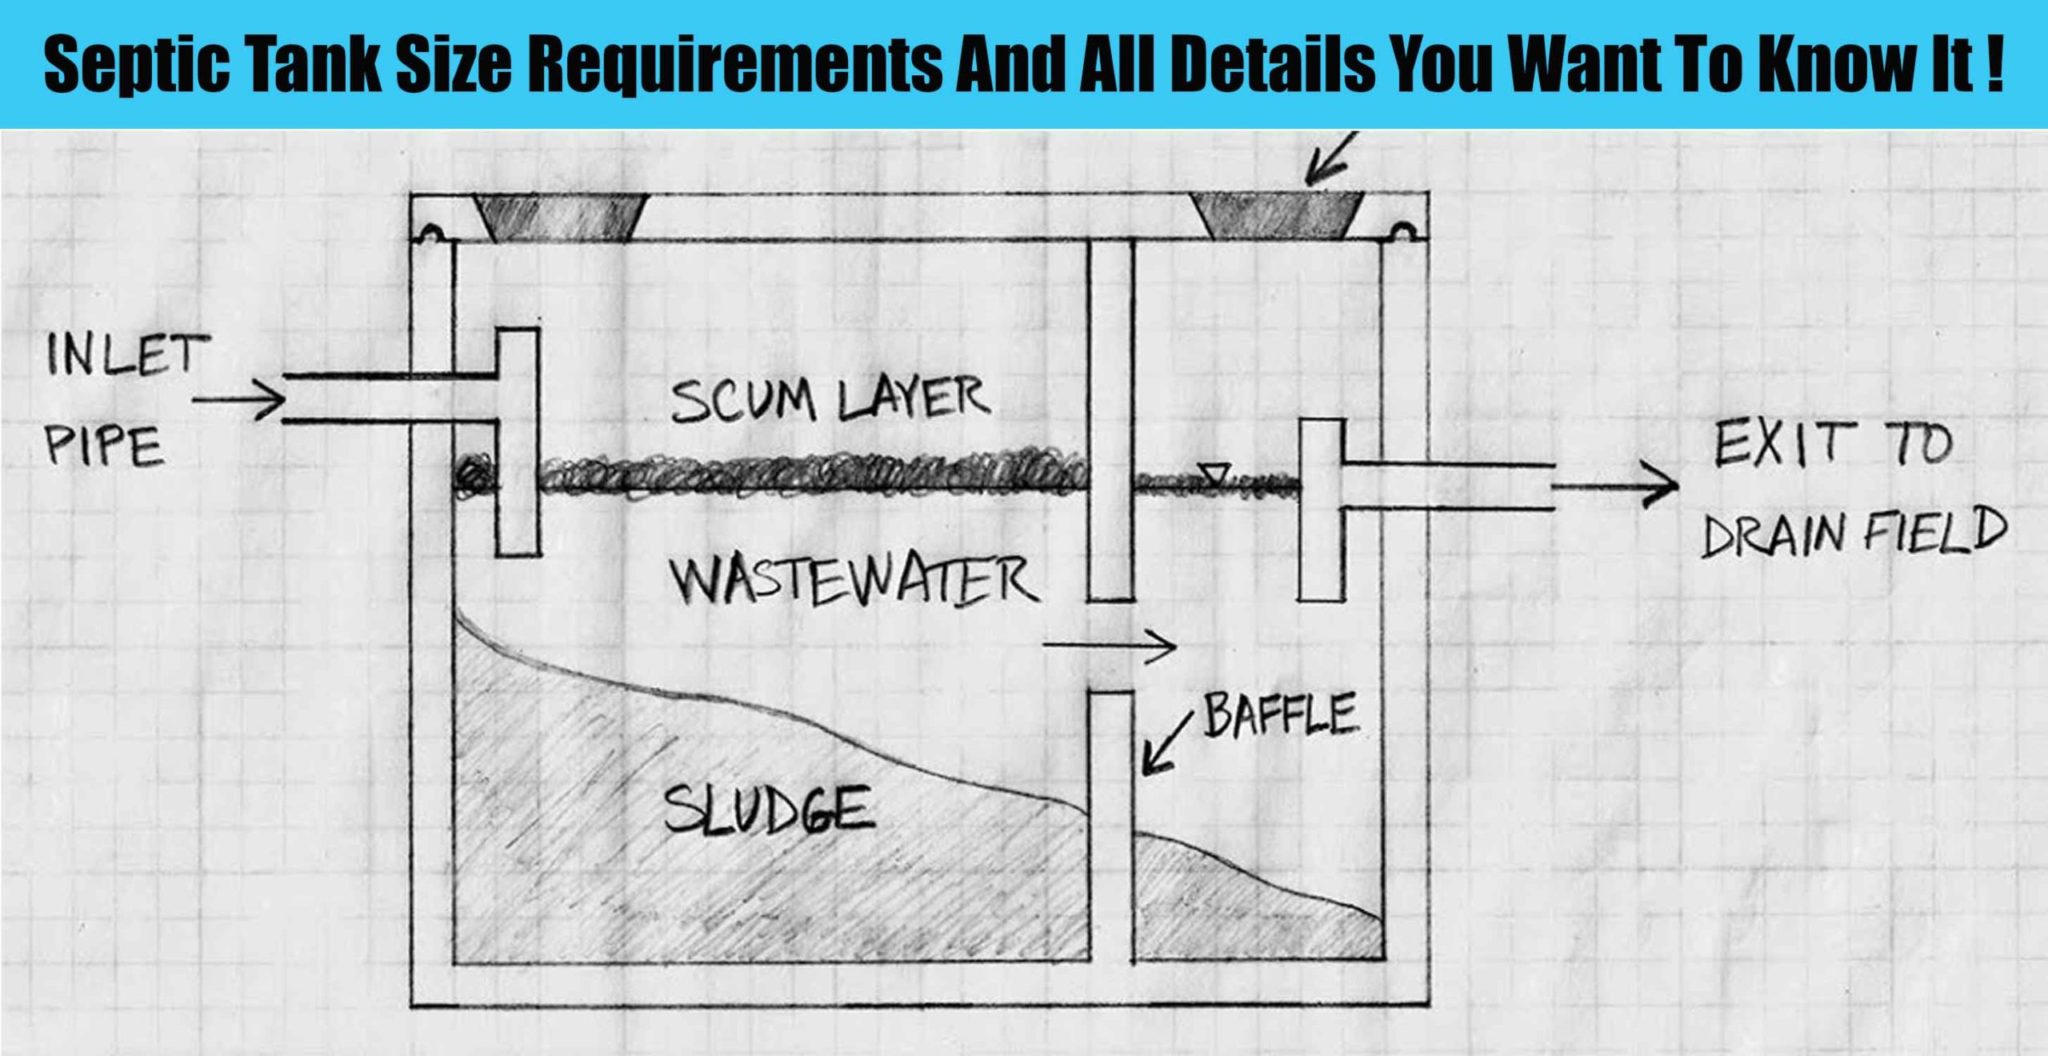 Septic Tank Design Details | Septic Tank Design 3 Chambers | How to Build a Septic Tank Concrete